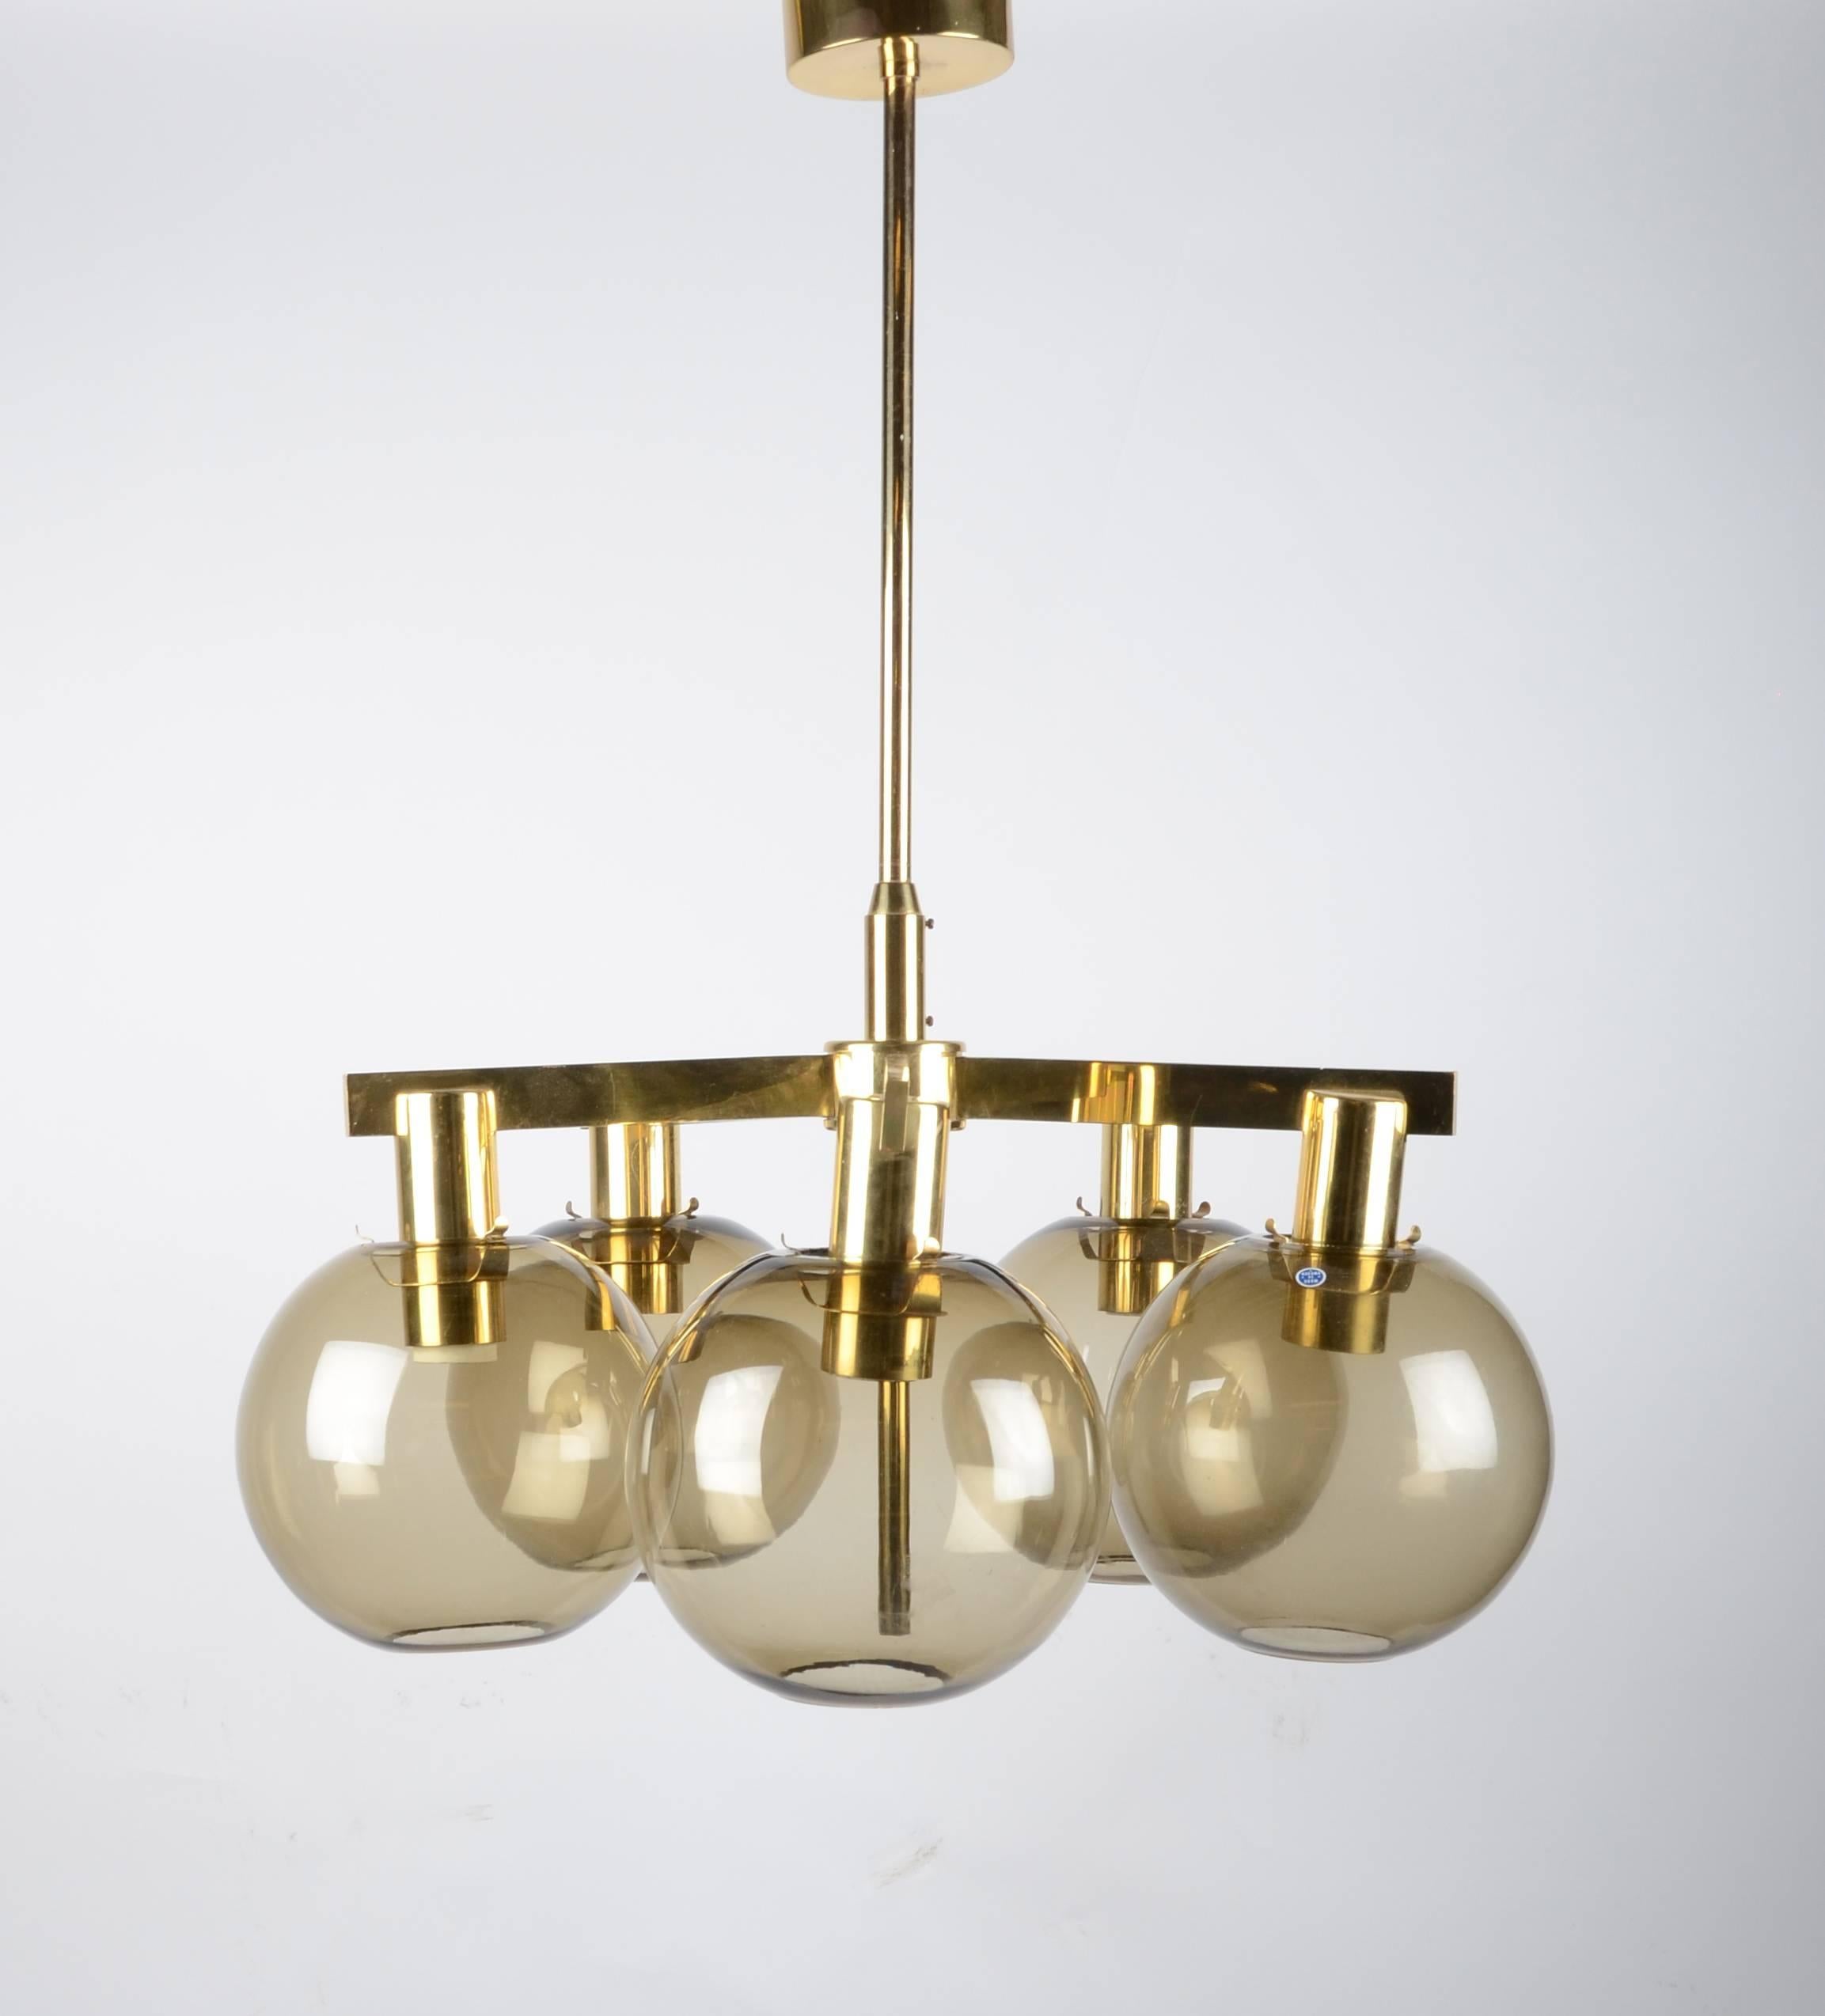 Chandelier in brass with five glass globes. Designed by Hans-Agne Jakobsson for Markaryd, Sweden, 1960s.